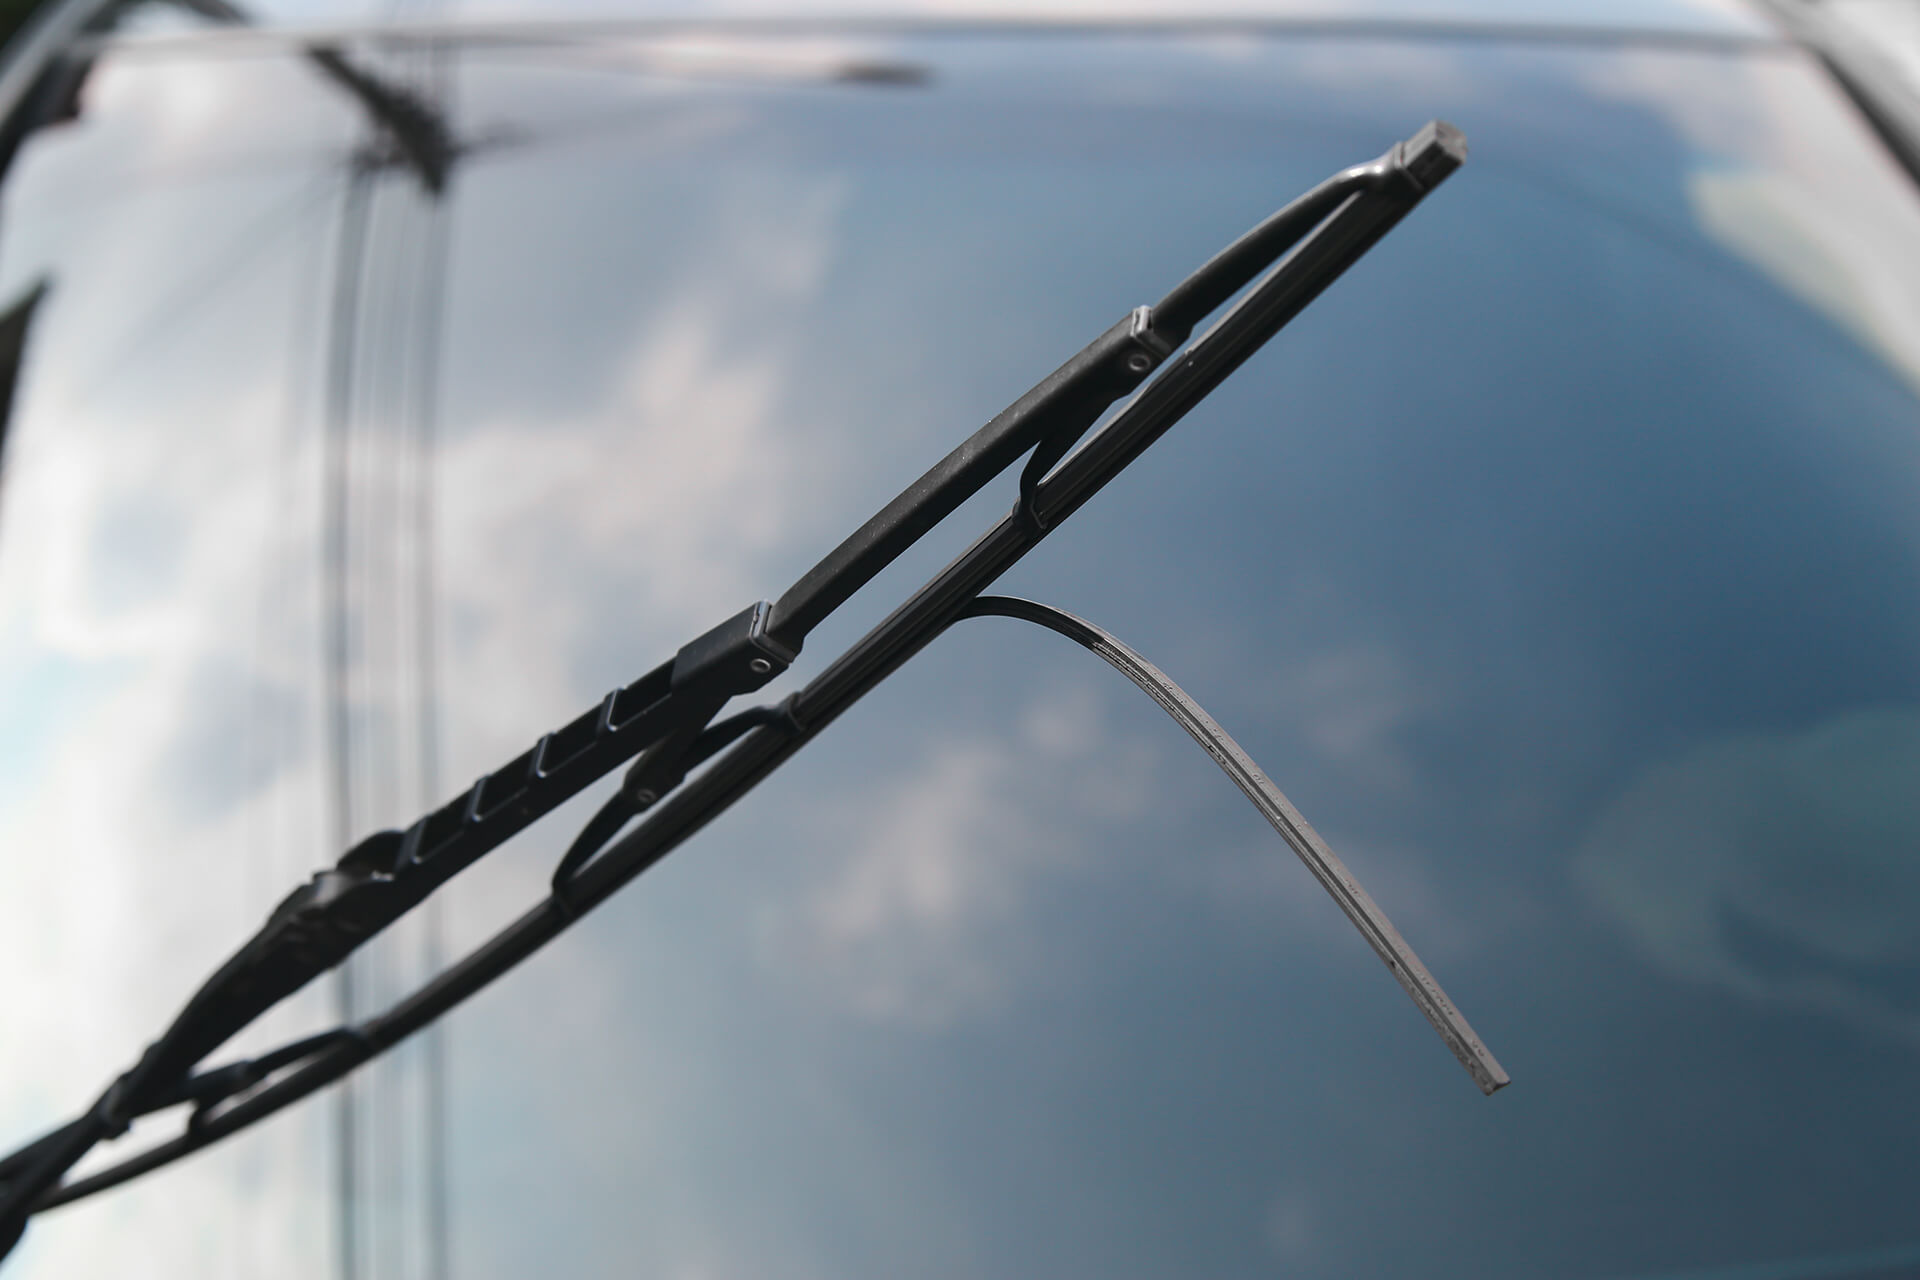 How to dispose of old wiper blades